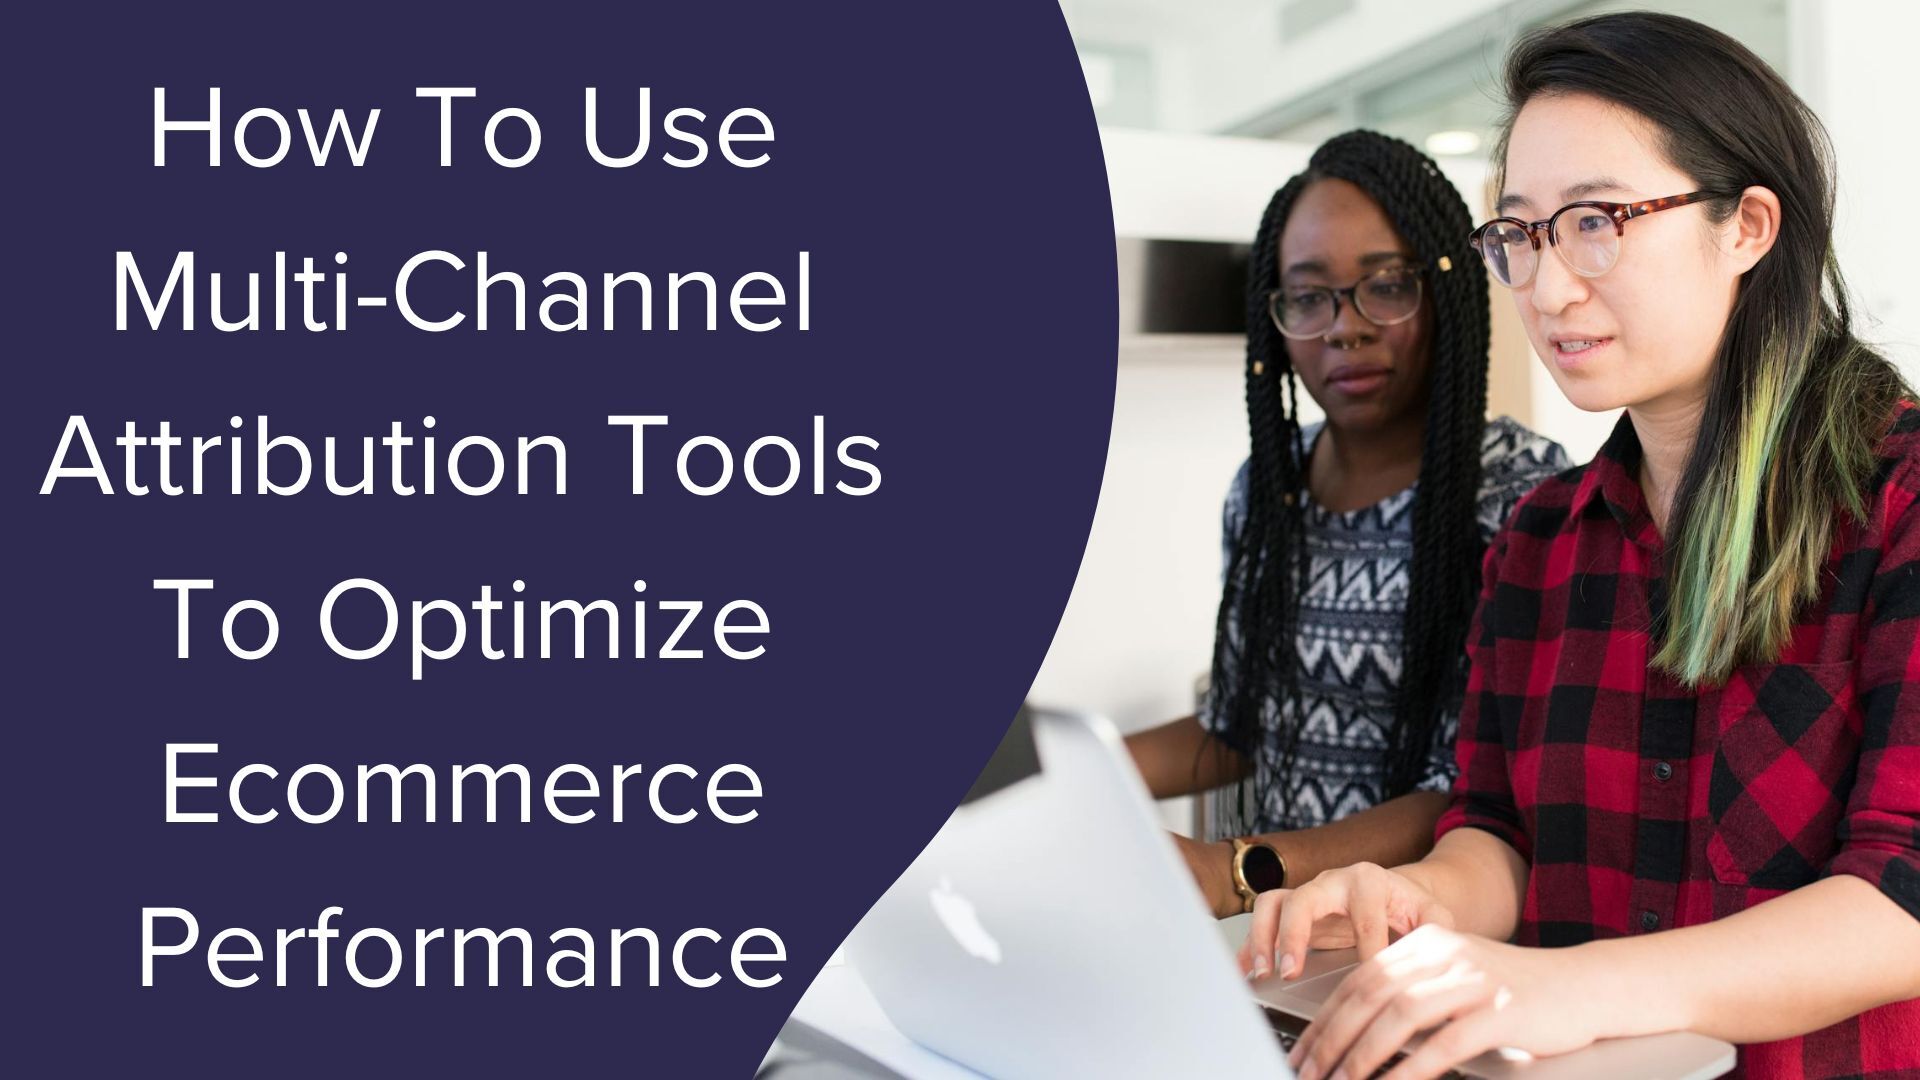 How To Use Multi-Channel Attribution Tools To Optimize Ecommerce Performance